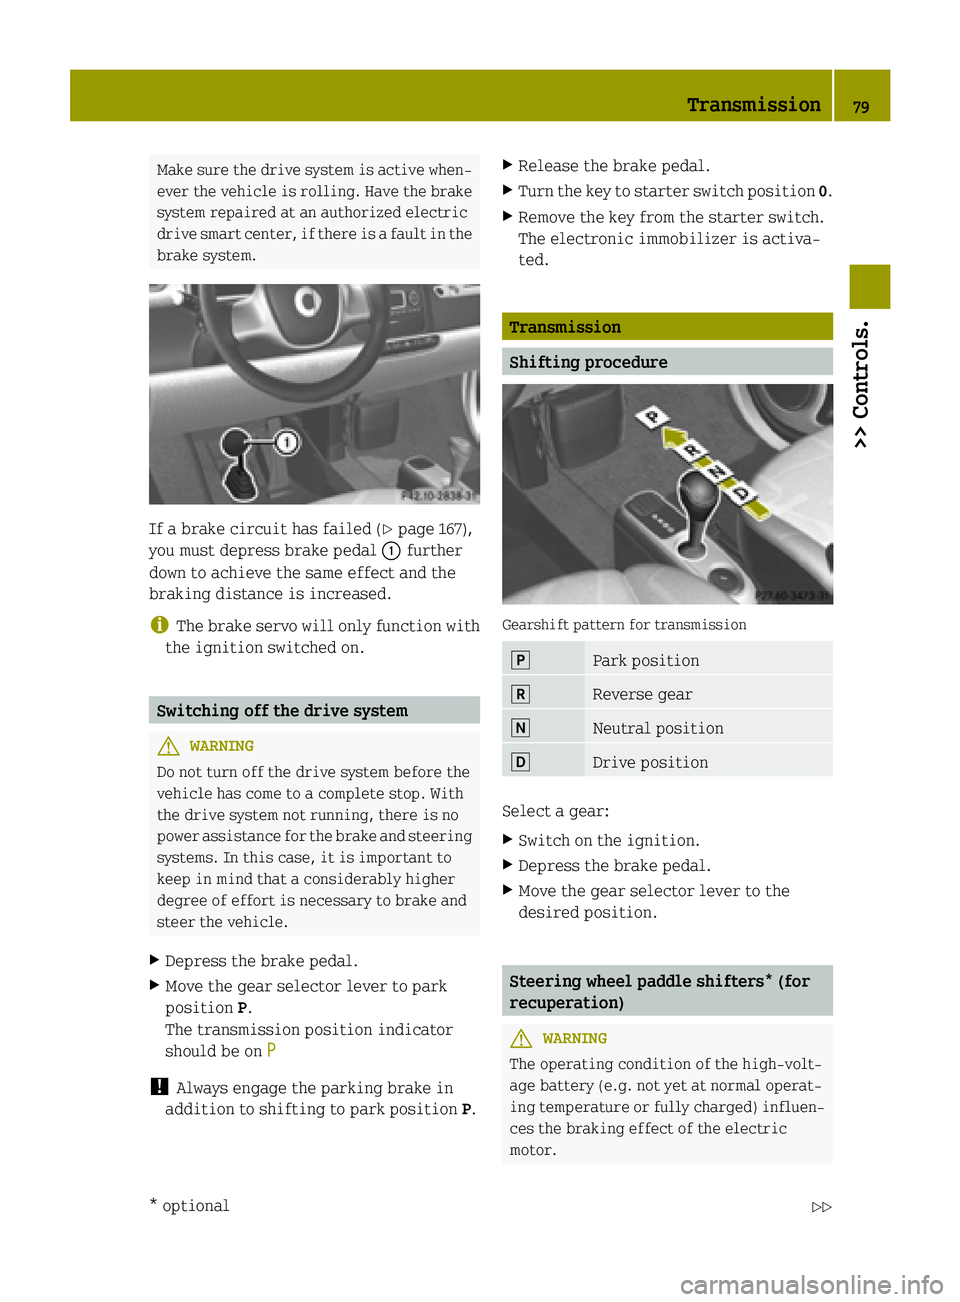 SMART FORTWO COUPE ELECTRIC DRIVE 2015  Owners Manual Make sure the drive system is active when-
ever the vehicle is rolling. Have the brake system repaired at an authorized electric
drive smart center, if there is a fault in the
brake system. If a brake